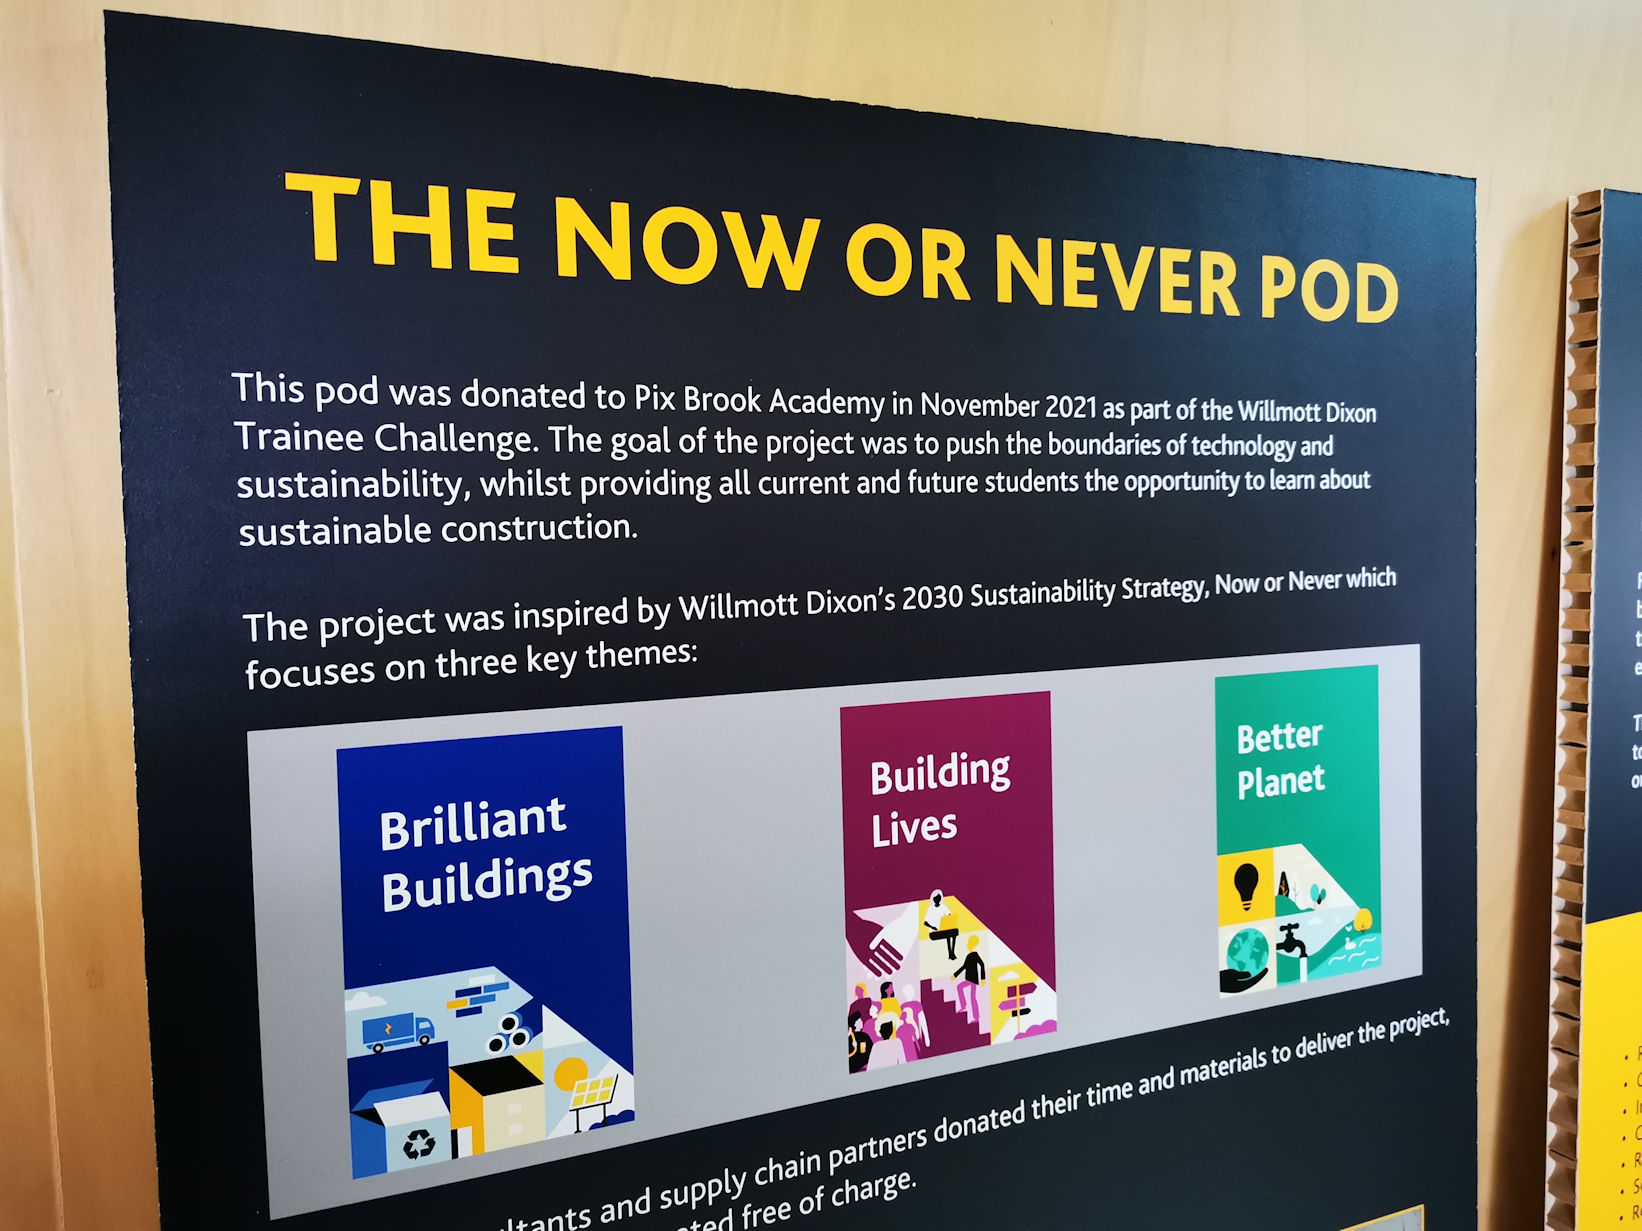 Now or Never pod signage mid.jpg